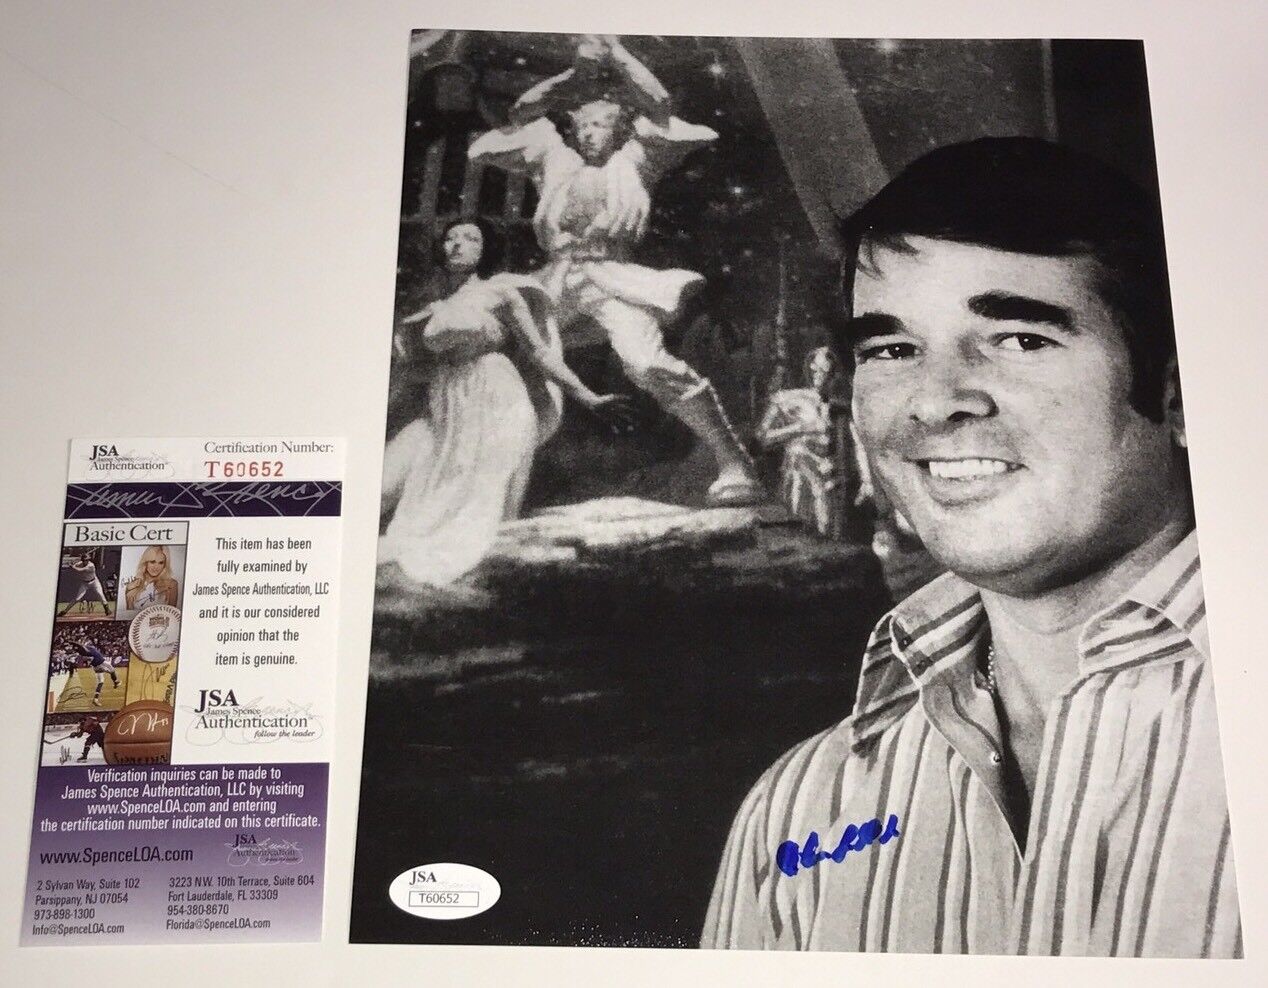 Alan Ladd Jr. STAR WARS Producer CO-FOUNDER RARE Signed 8x10 Photo Poster painting JSA COA